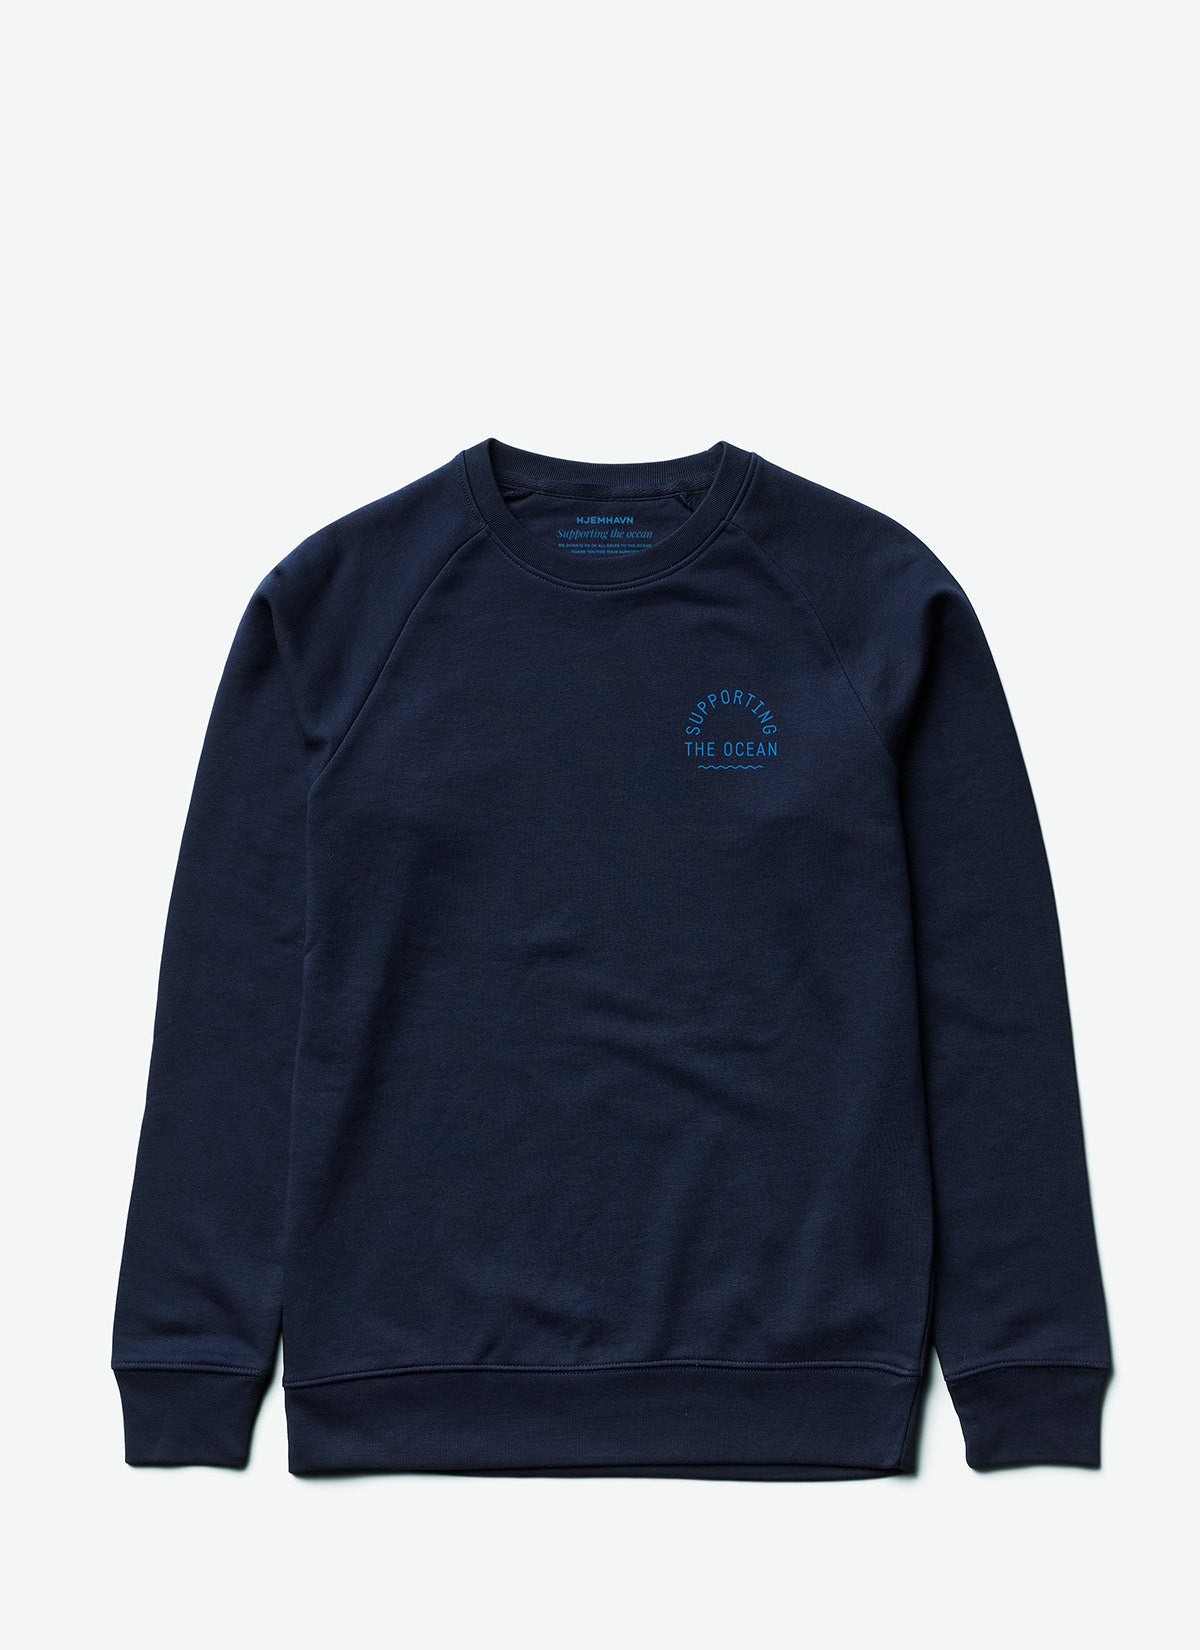 Sweat "Supporting the Ocean"